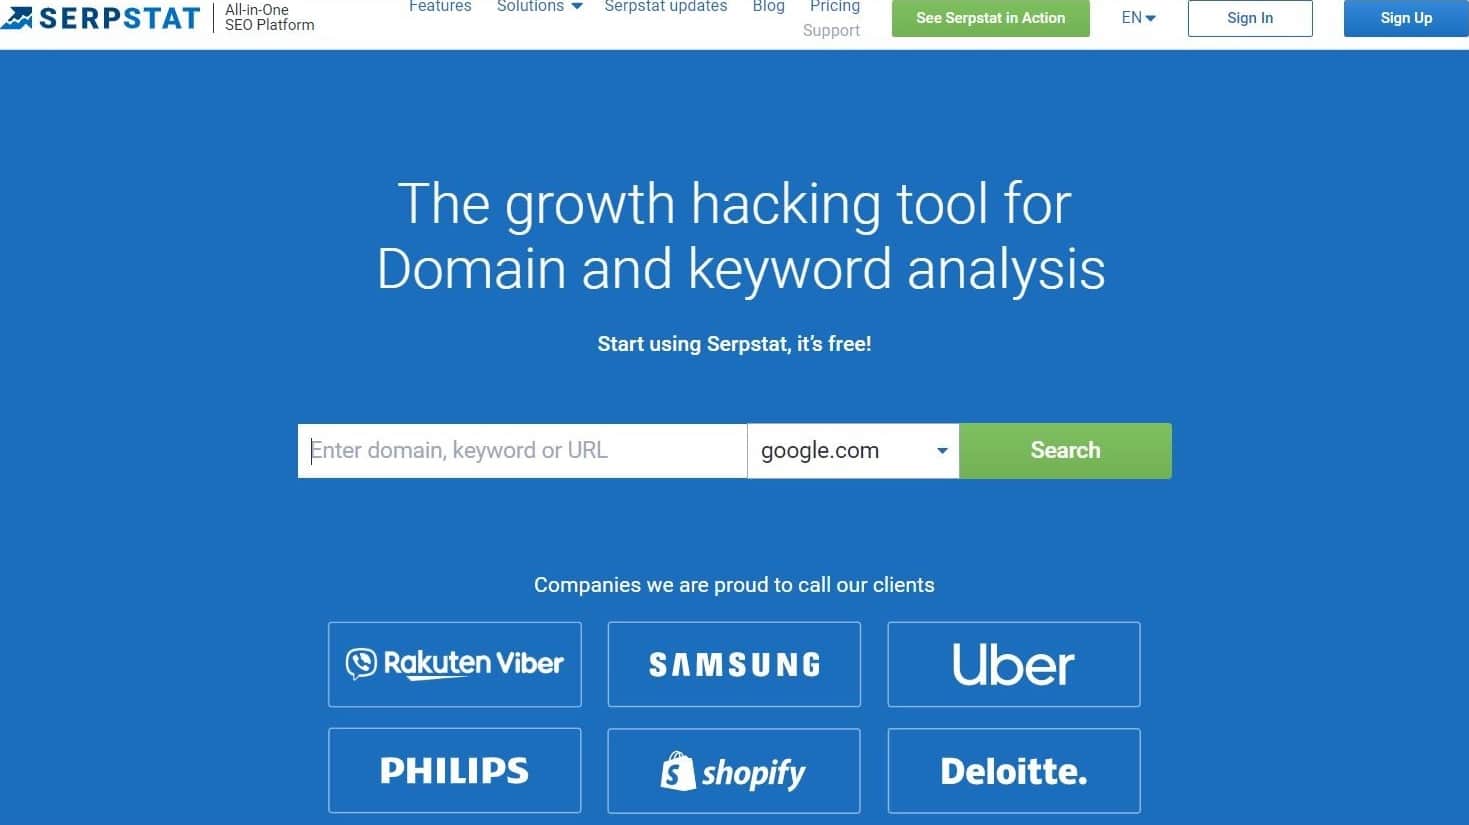 L’homepage di Serpstat homepage con una barra di ricerca e il motto "The growth hacking tool for Domain and keyword analysis".